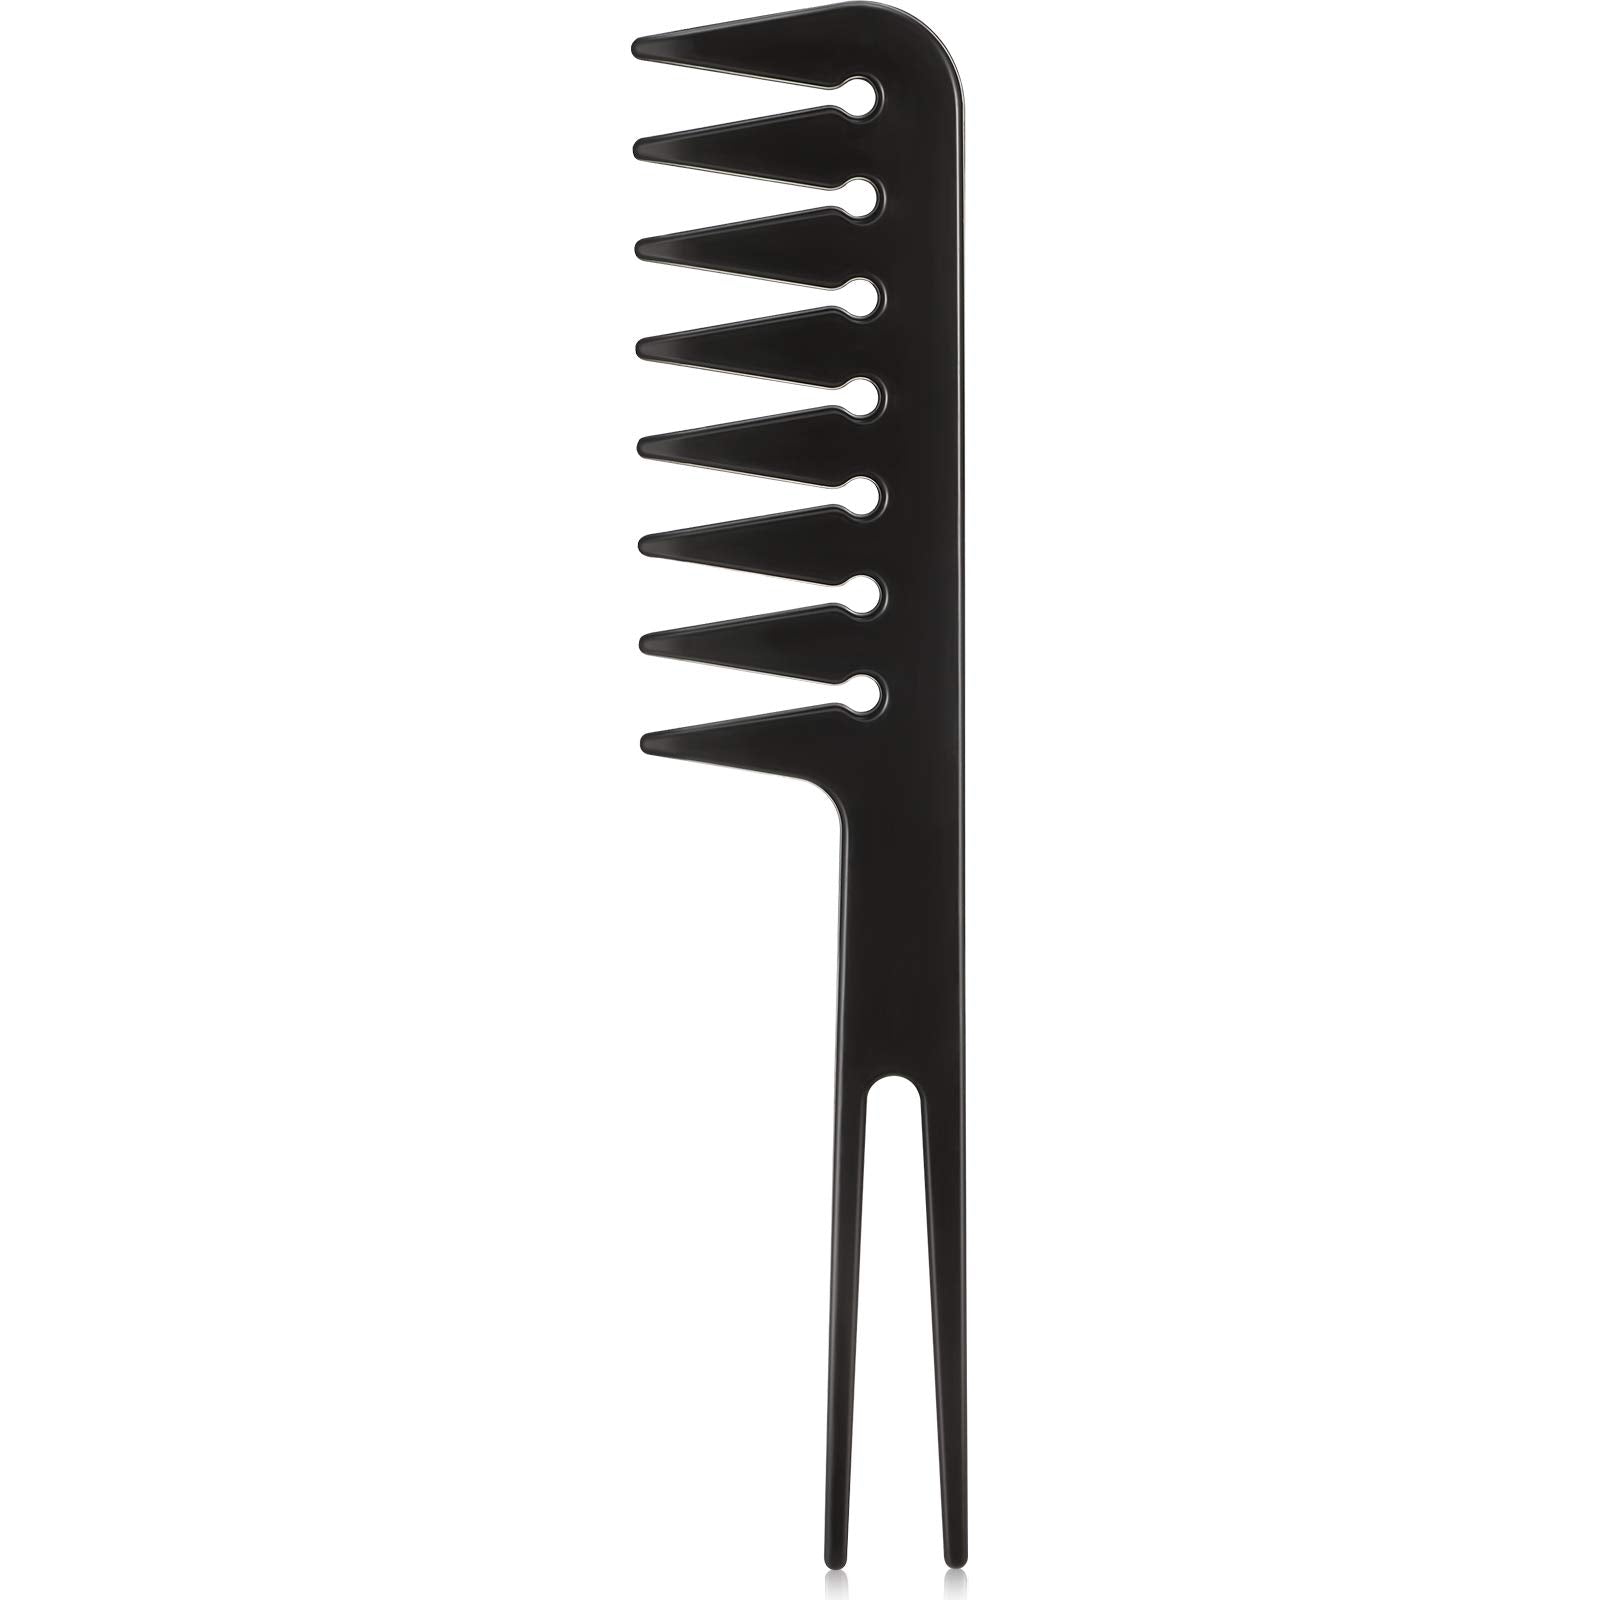 Wide Tooth Comb Fantail Comb Styling Comb Shaping Wet Pick Barber Brush Comb for Women Men Most Hair Types Salon Barber